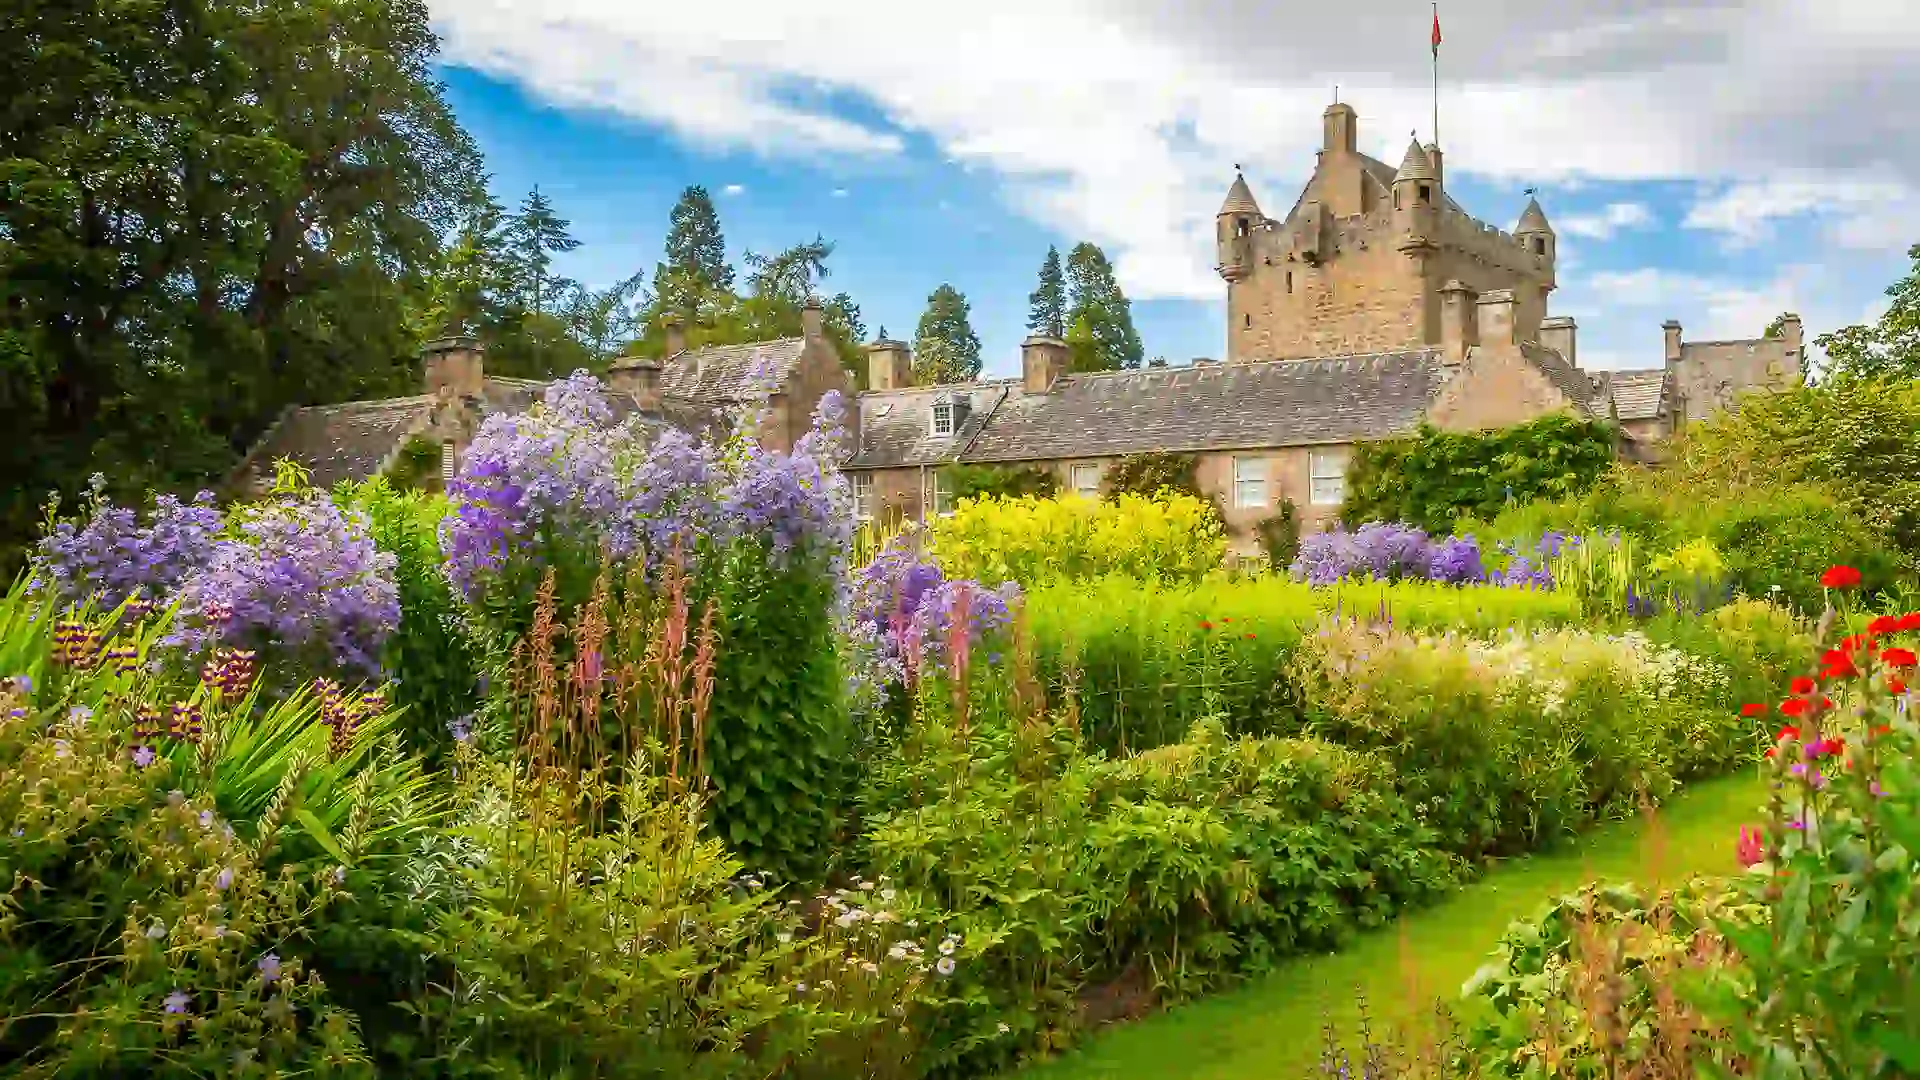 Green garden with purple and orange flowers behind castle.